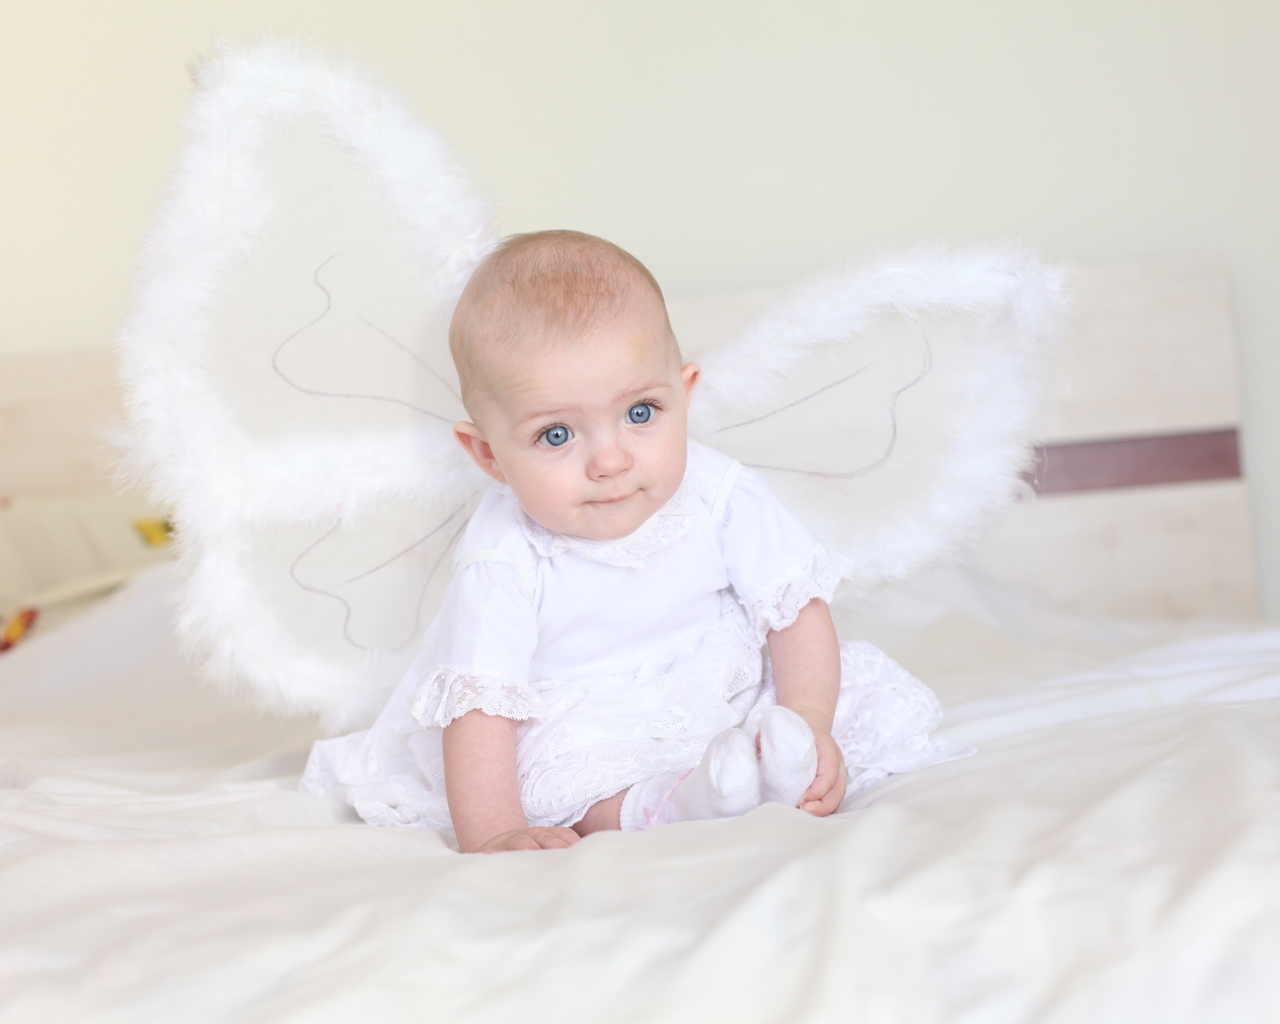 Little Angel for 1280 x 1024 resolution